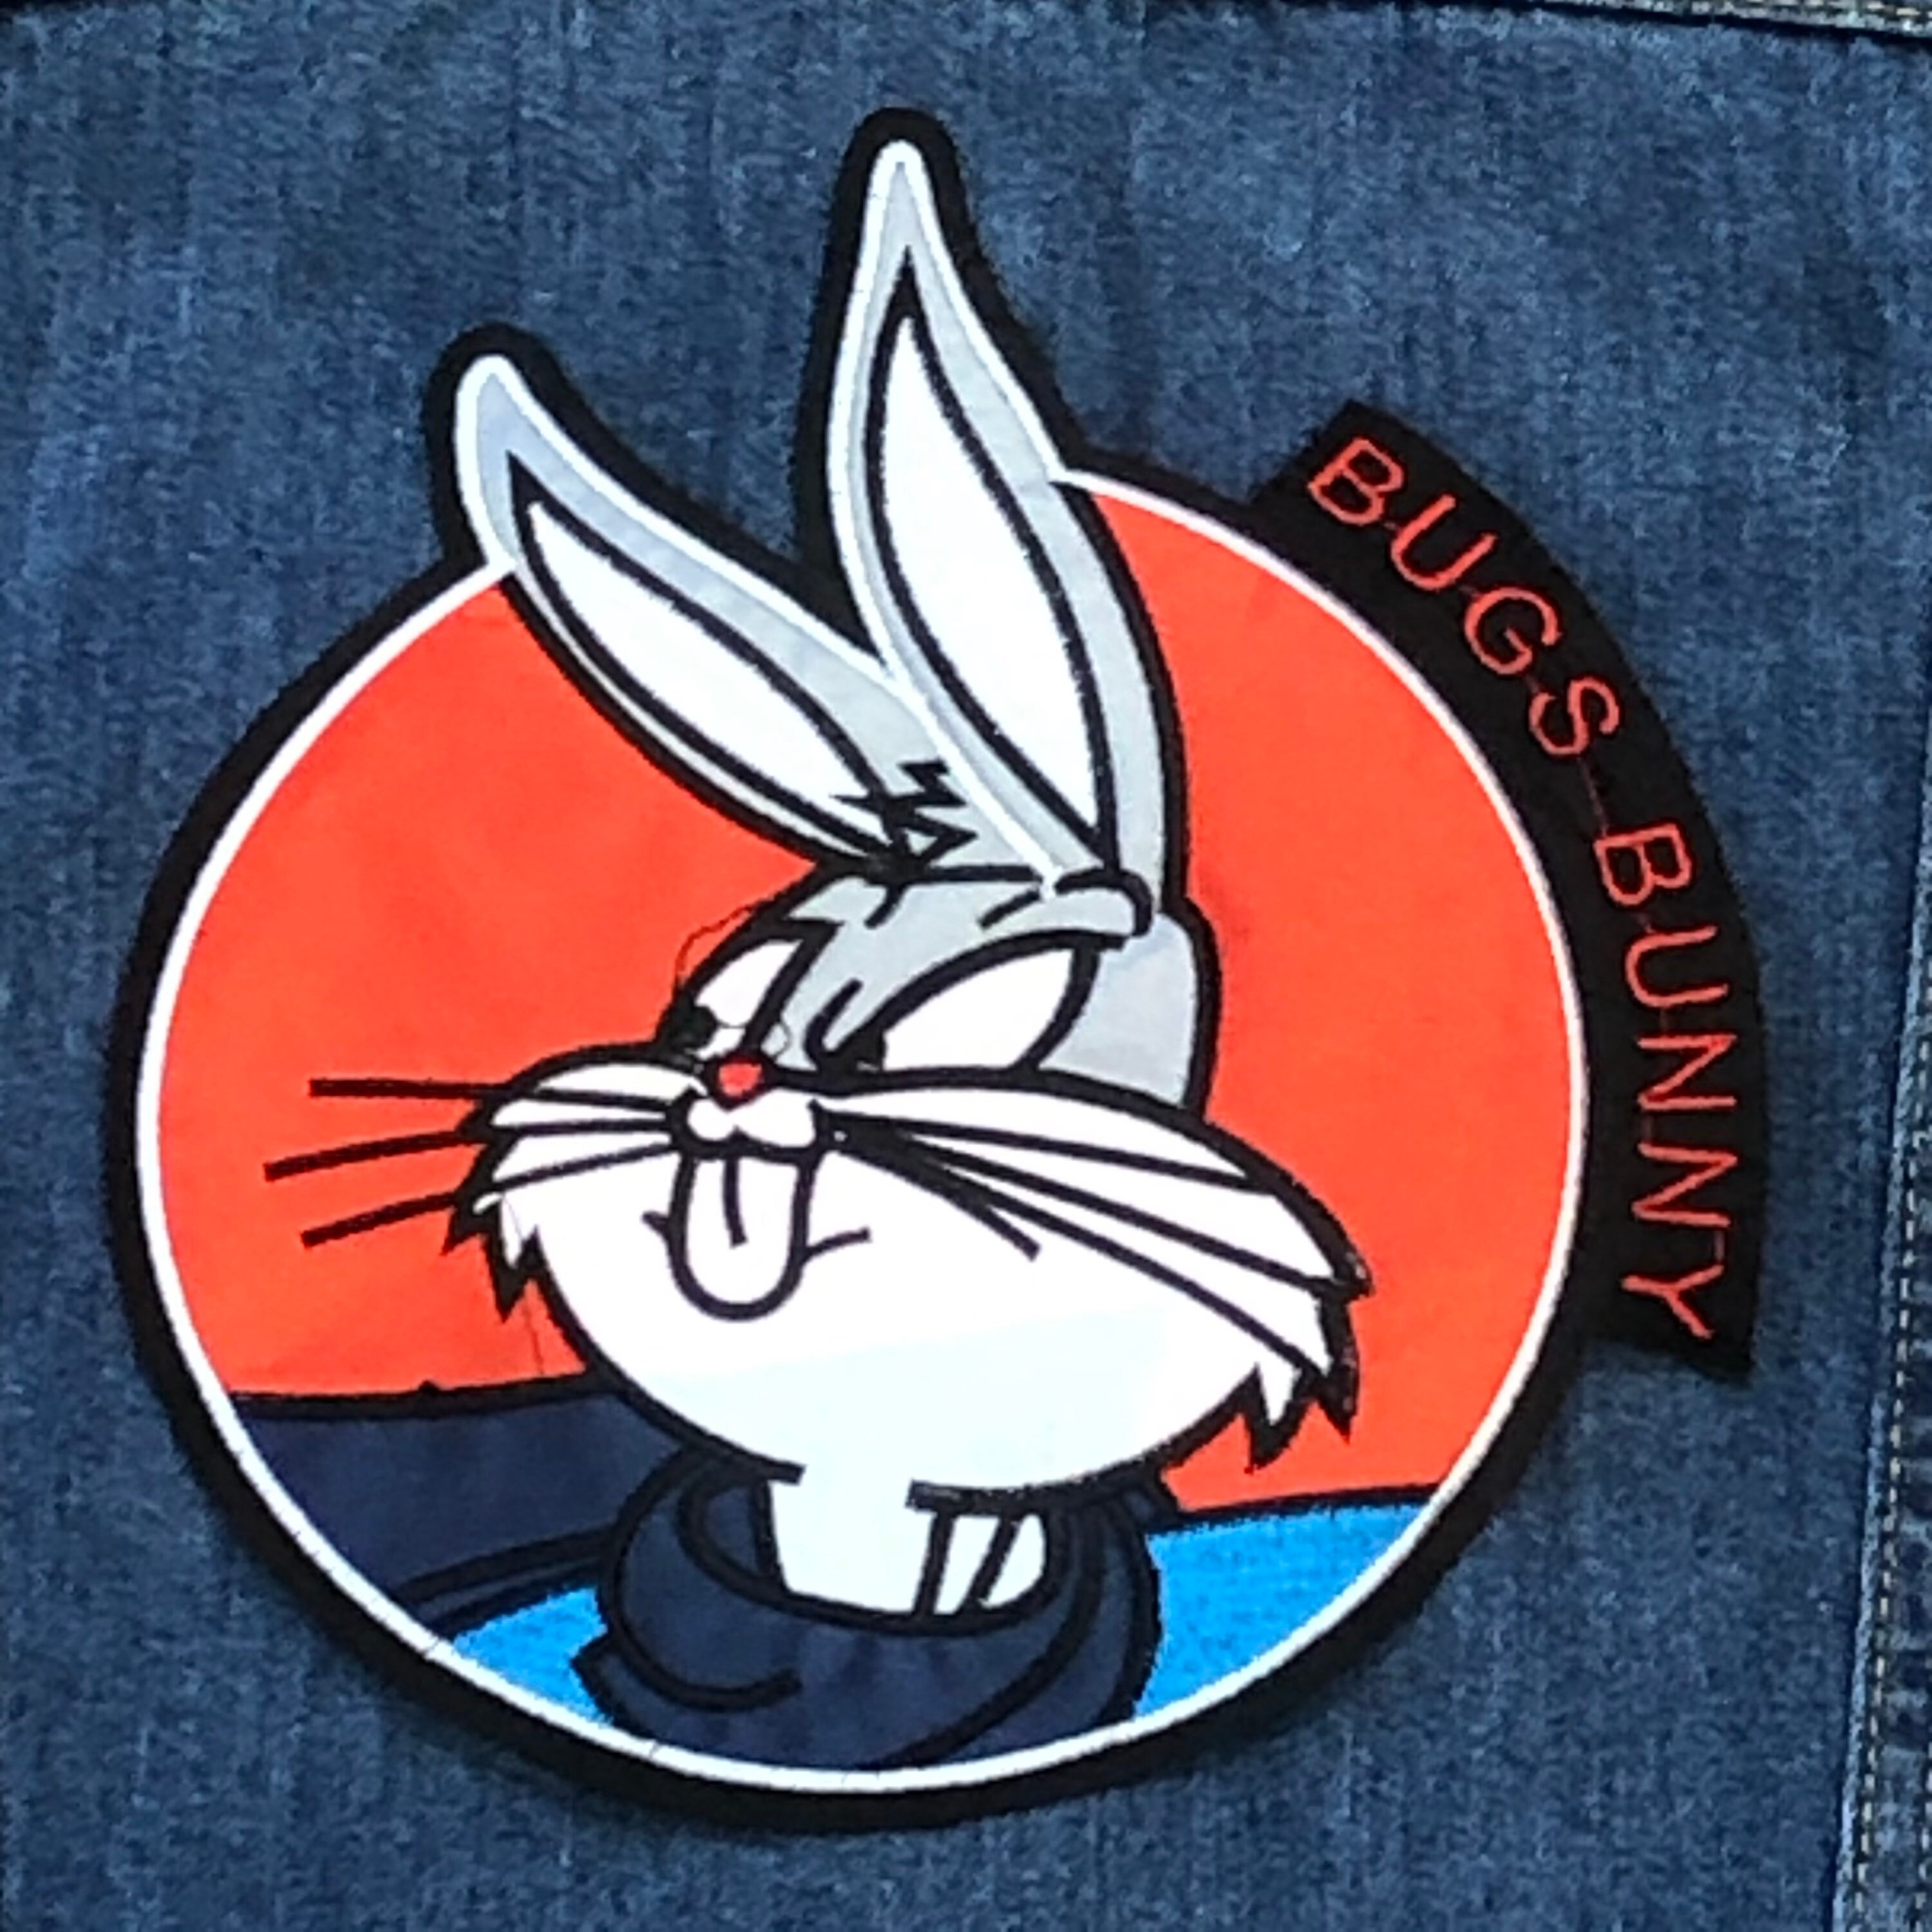 Bugs Bunny Patch iron on or sew on | Etsy